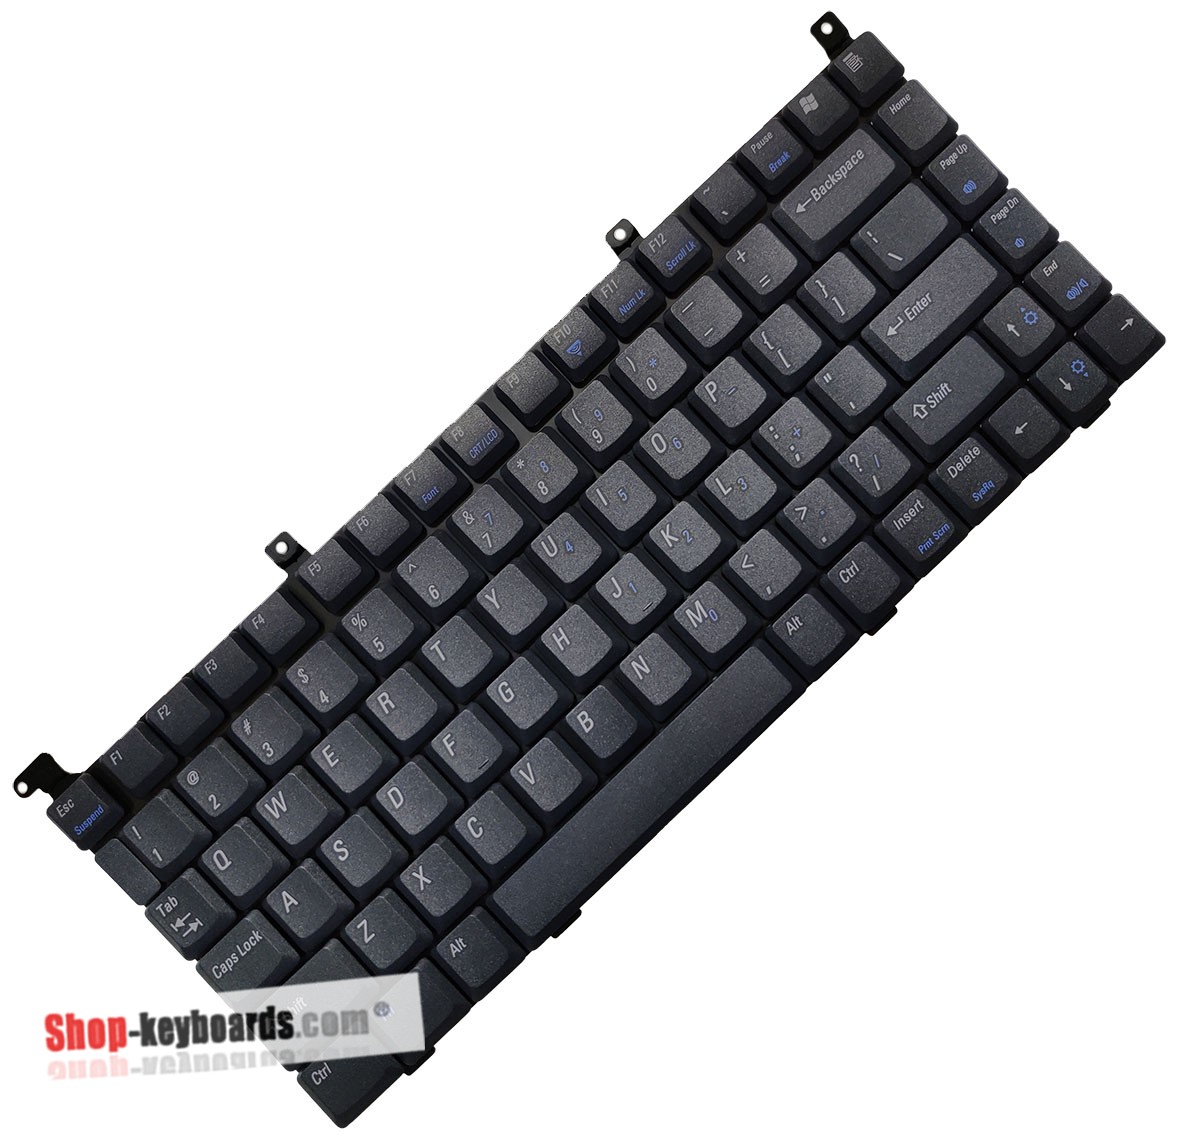 Dell Inspiron 2600 Keyboard replacement